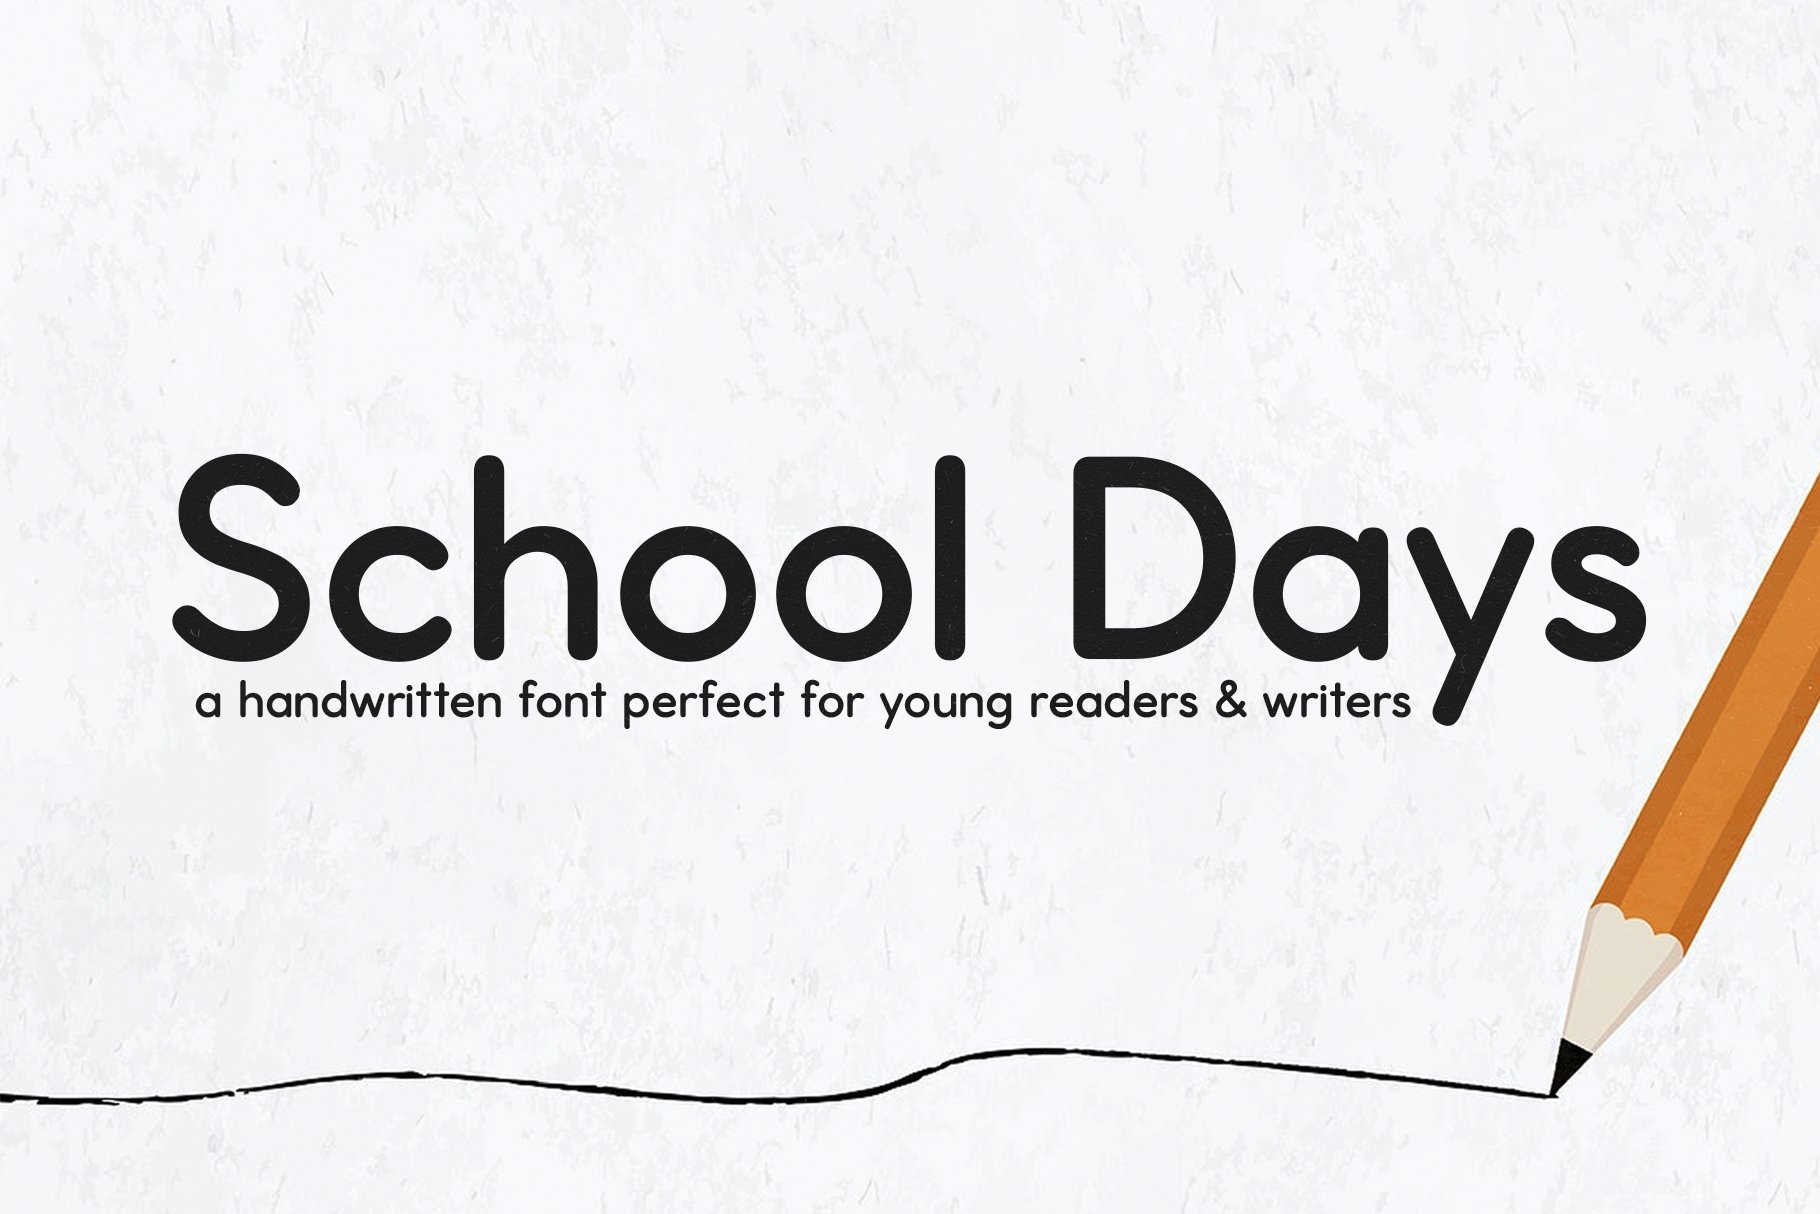 School Days Font cover image.